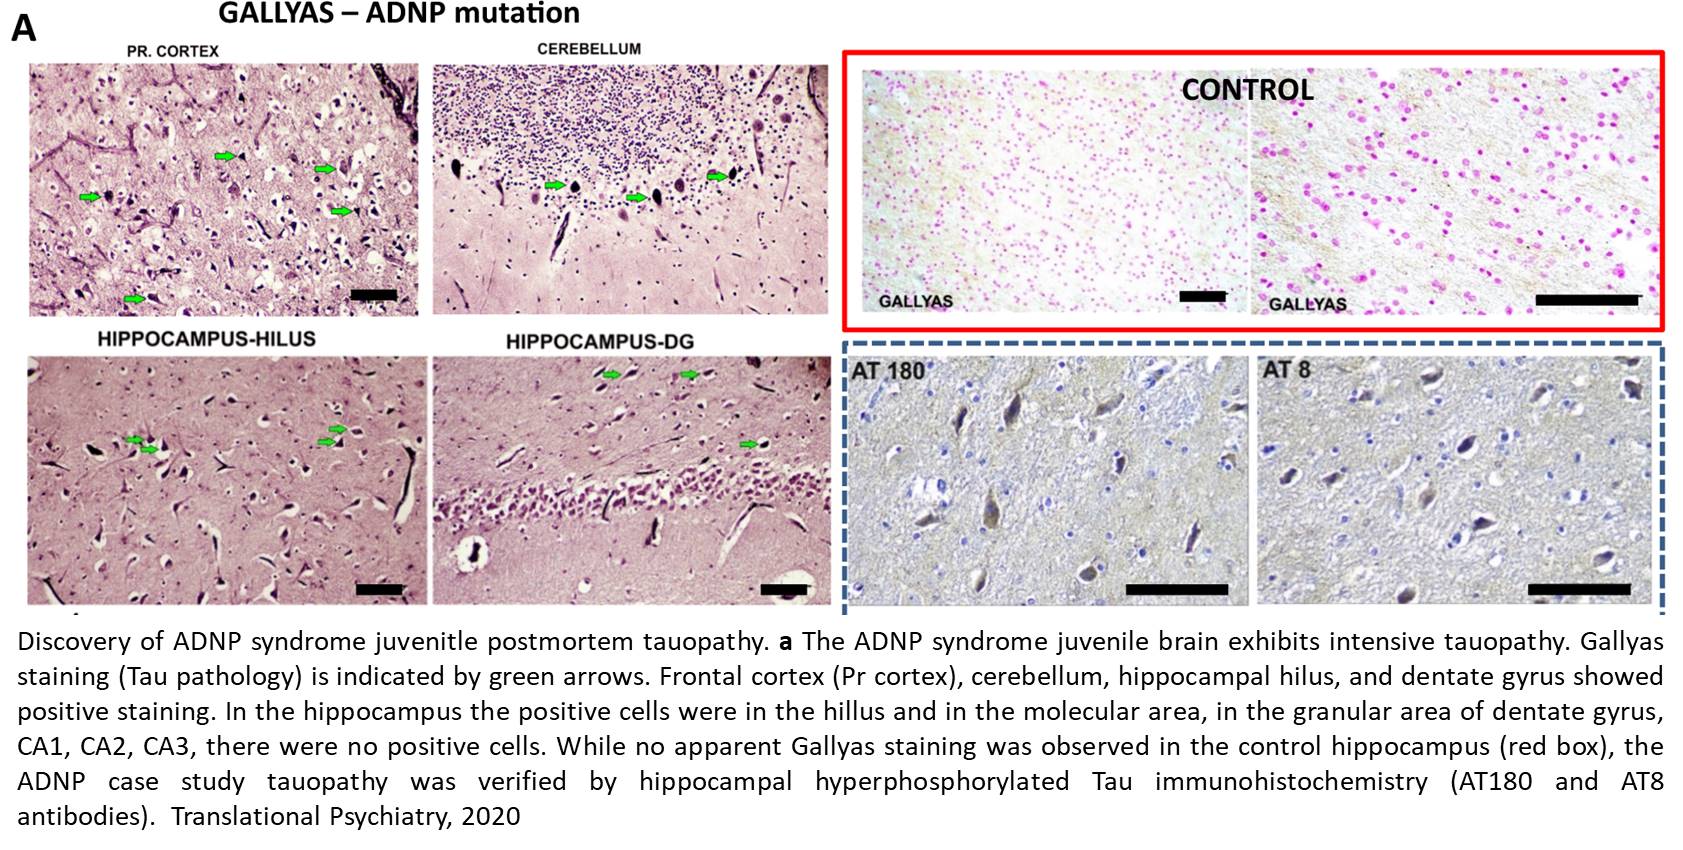 Tauopathy in the young autistic brain